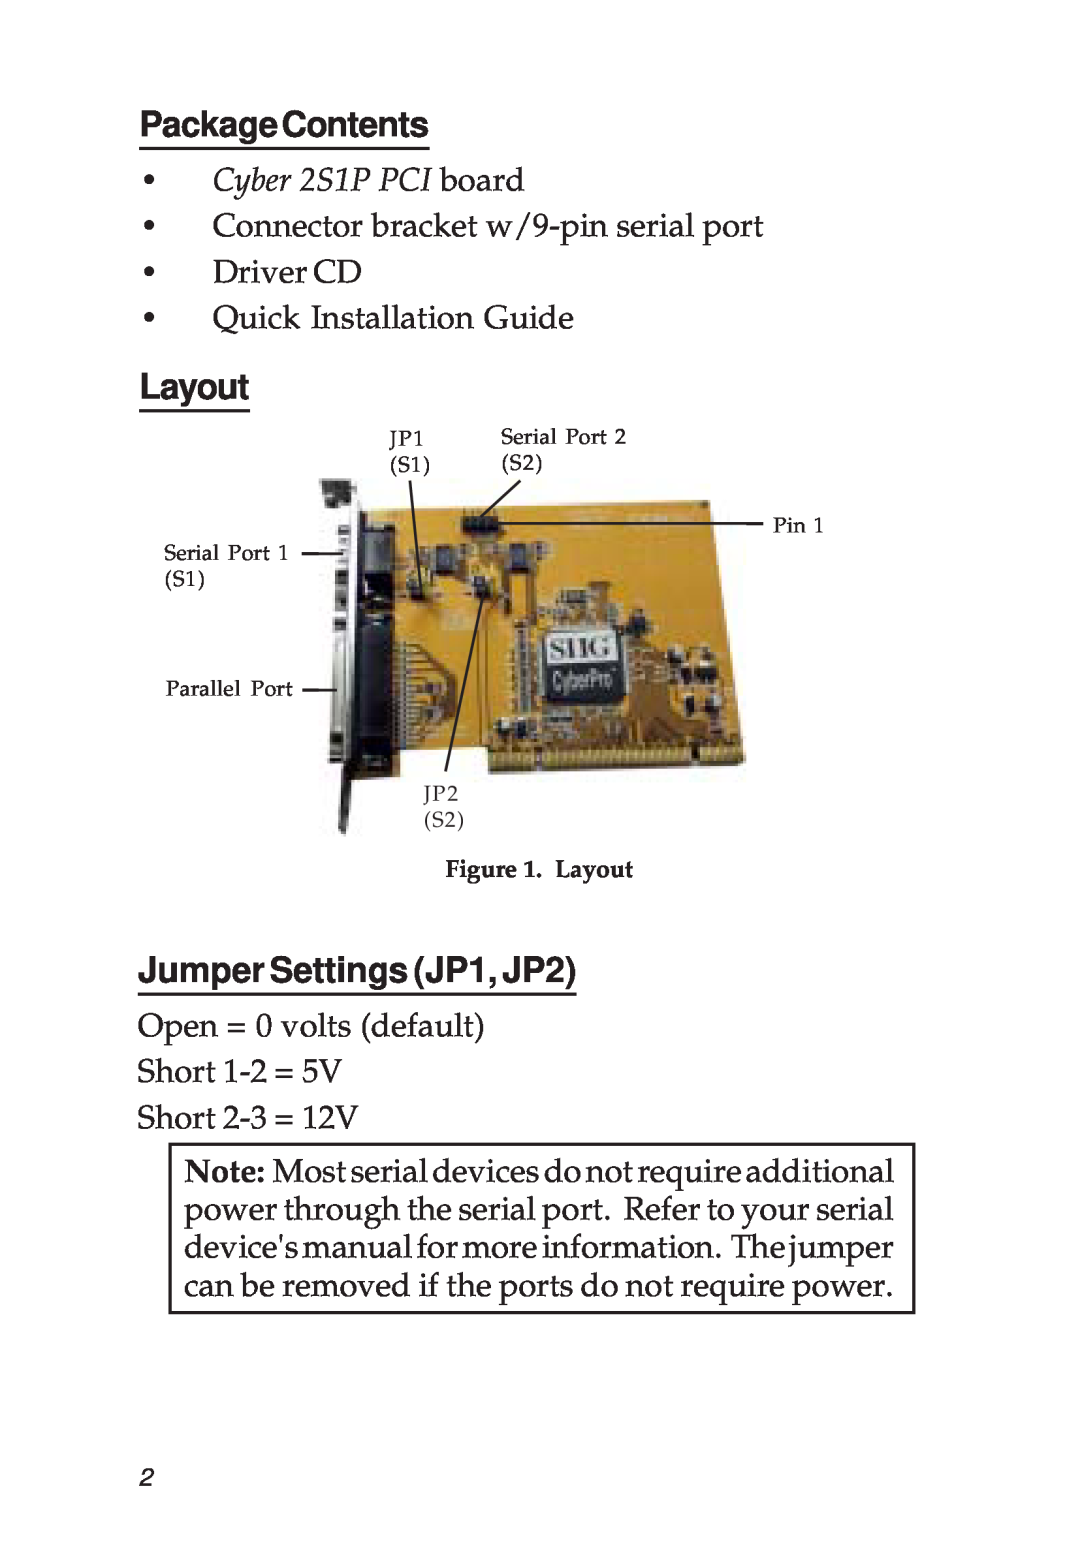 SIIG manual PackageContents, Layout, Jumper Settings JP1, JP2, Cyber 2S1P PCI board 